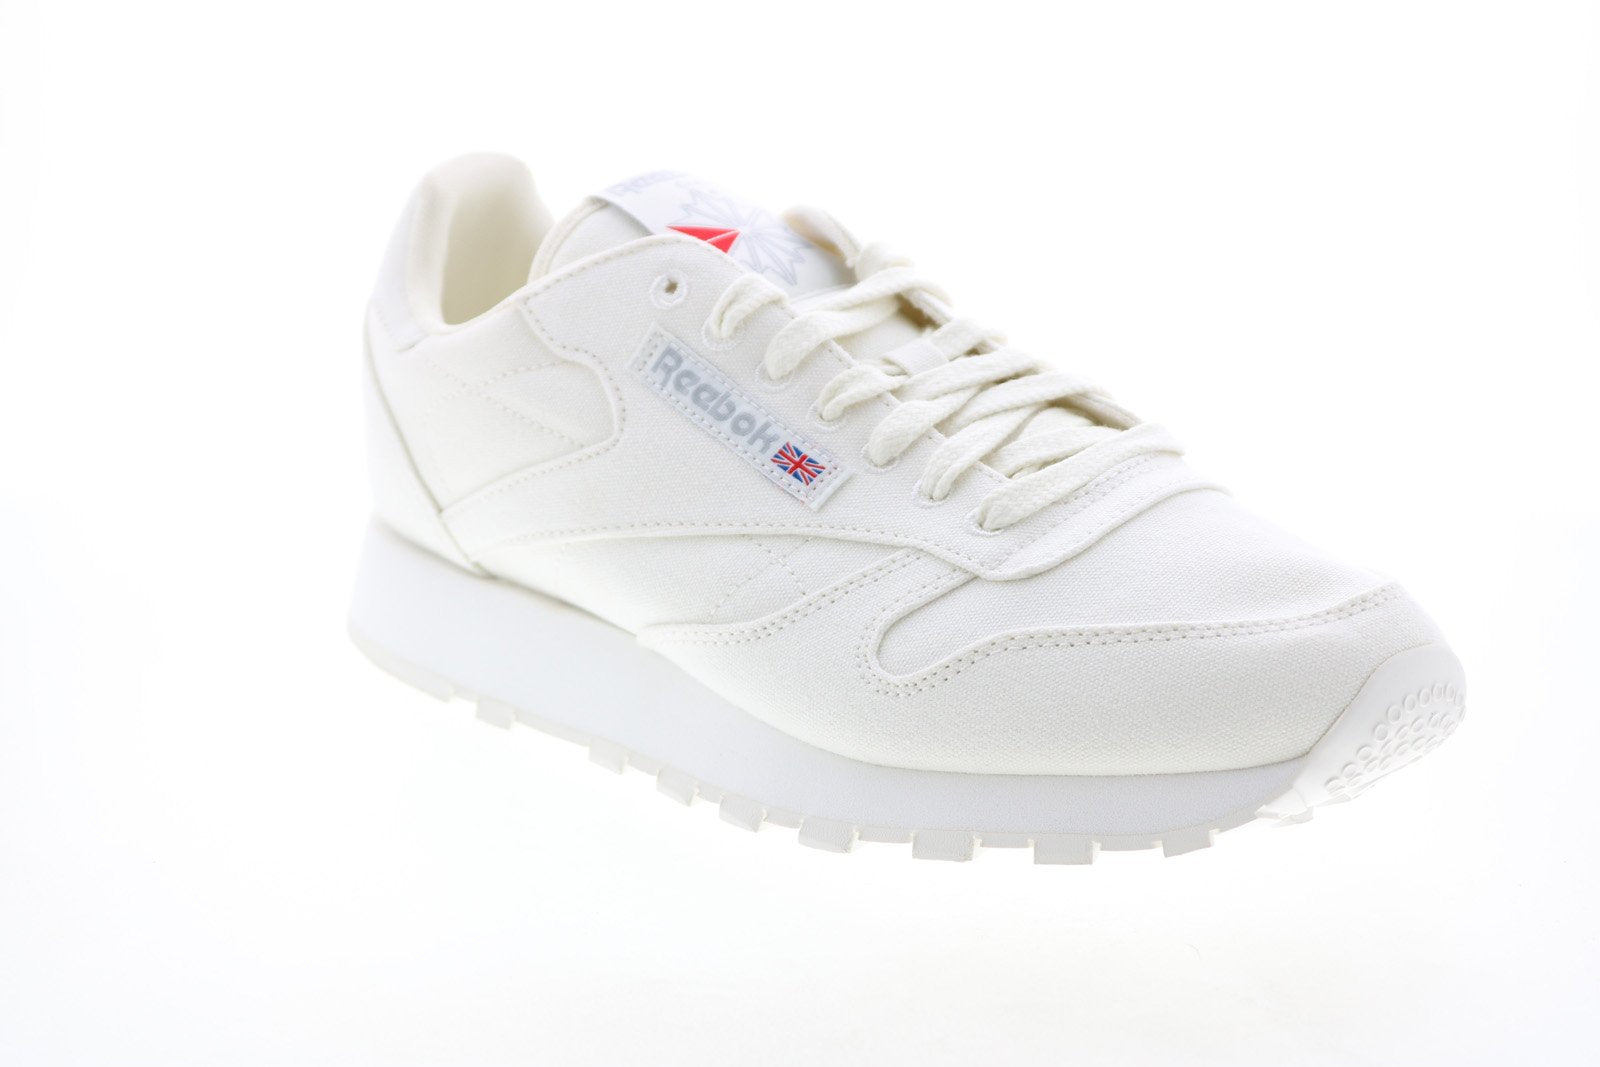 Reebok Classic Leather Grow H68781 Mens White Lifestyle Sneakers Shoes - Shoes